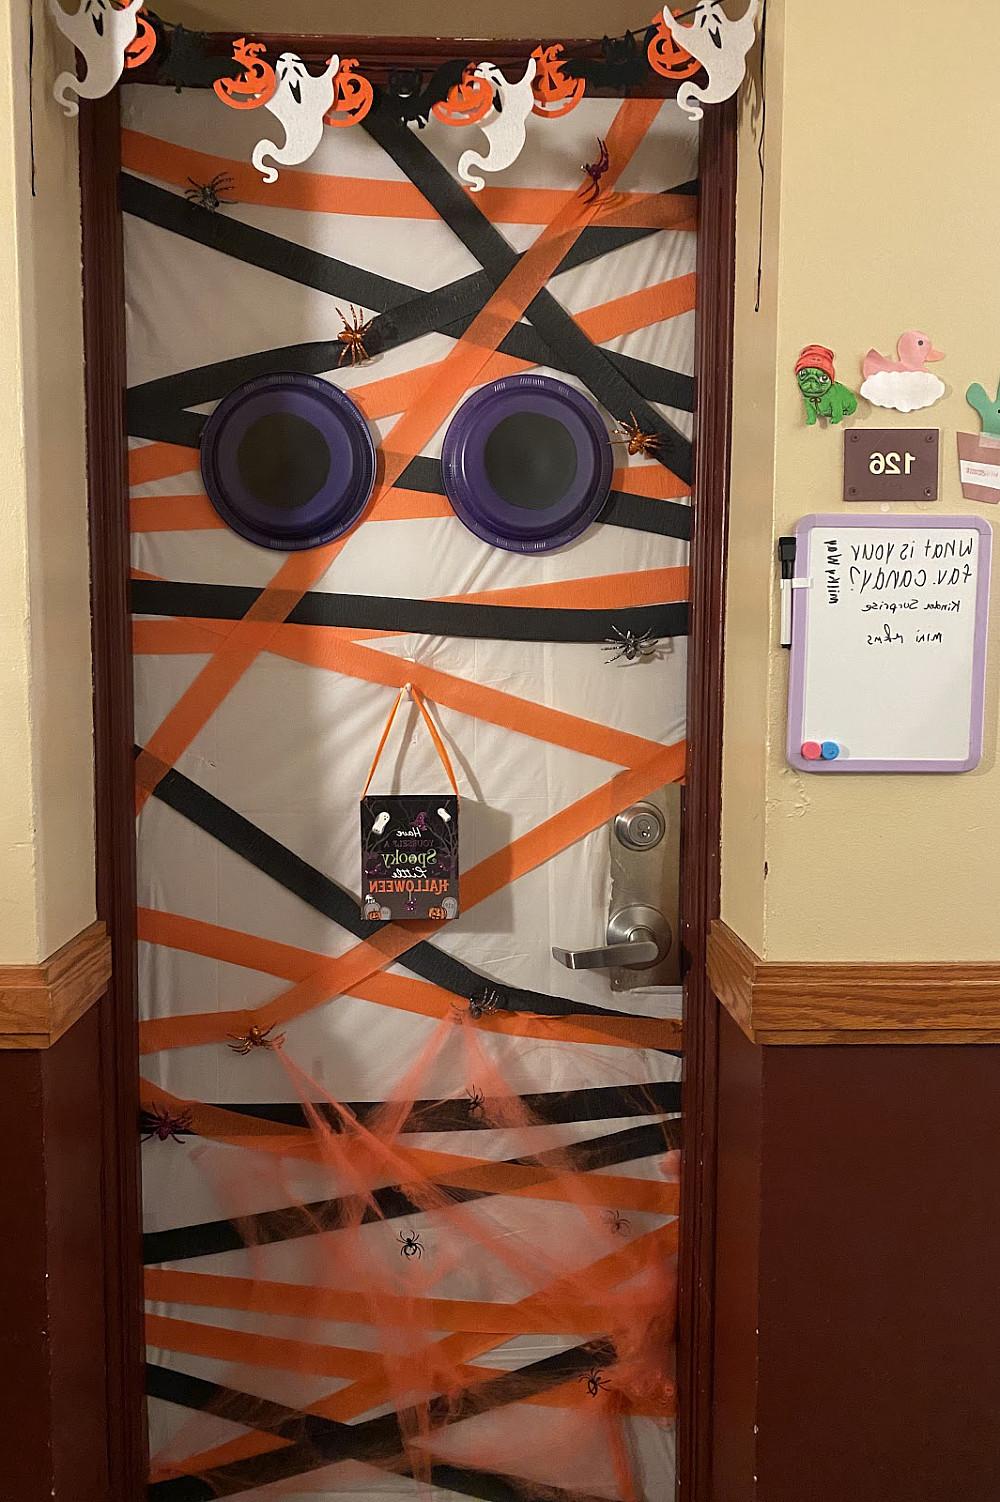 A dorm door covered in orange and black ribbons and two purple eyes.